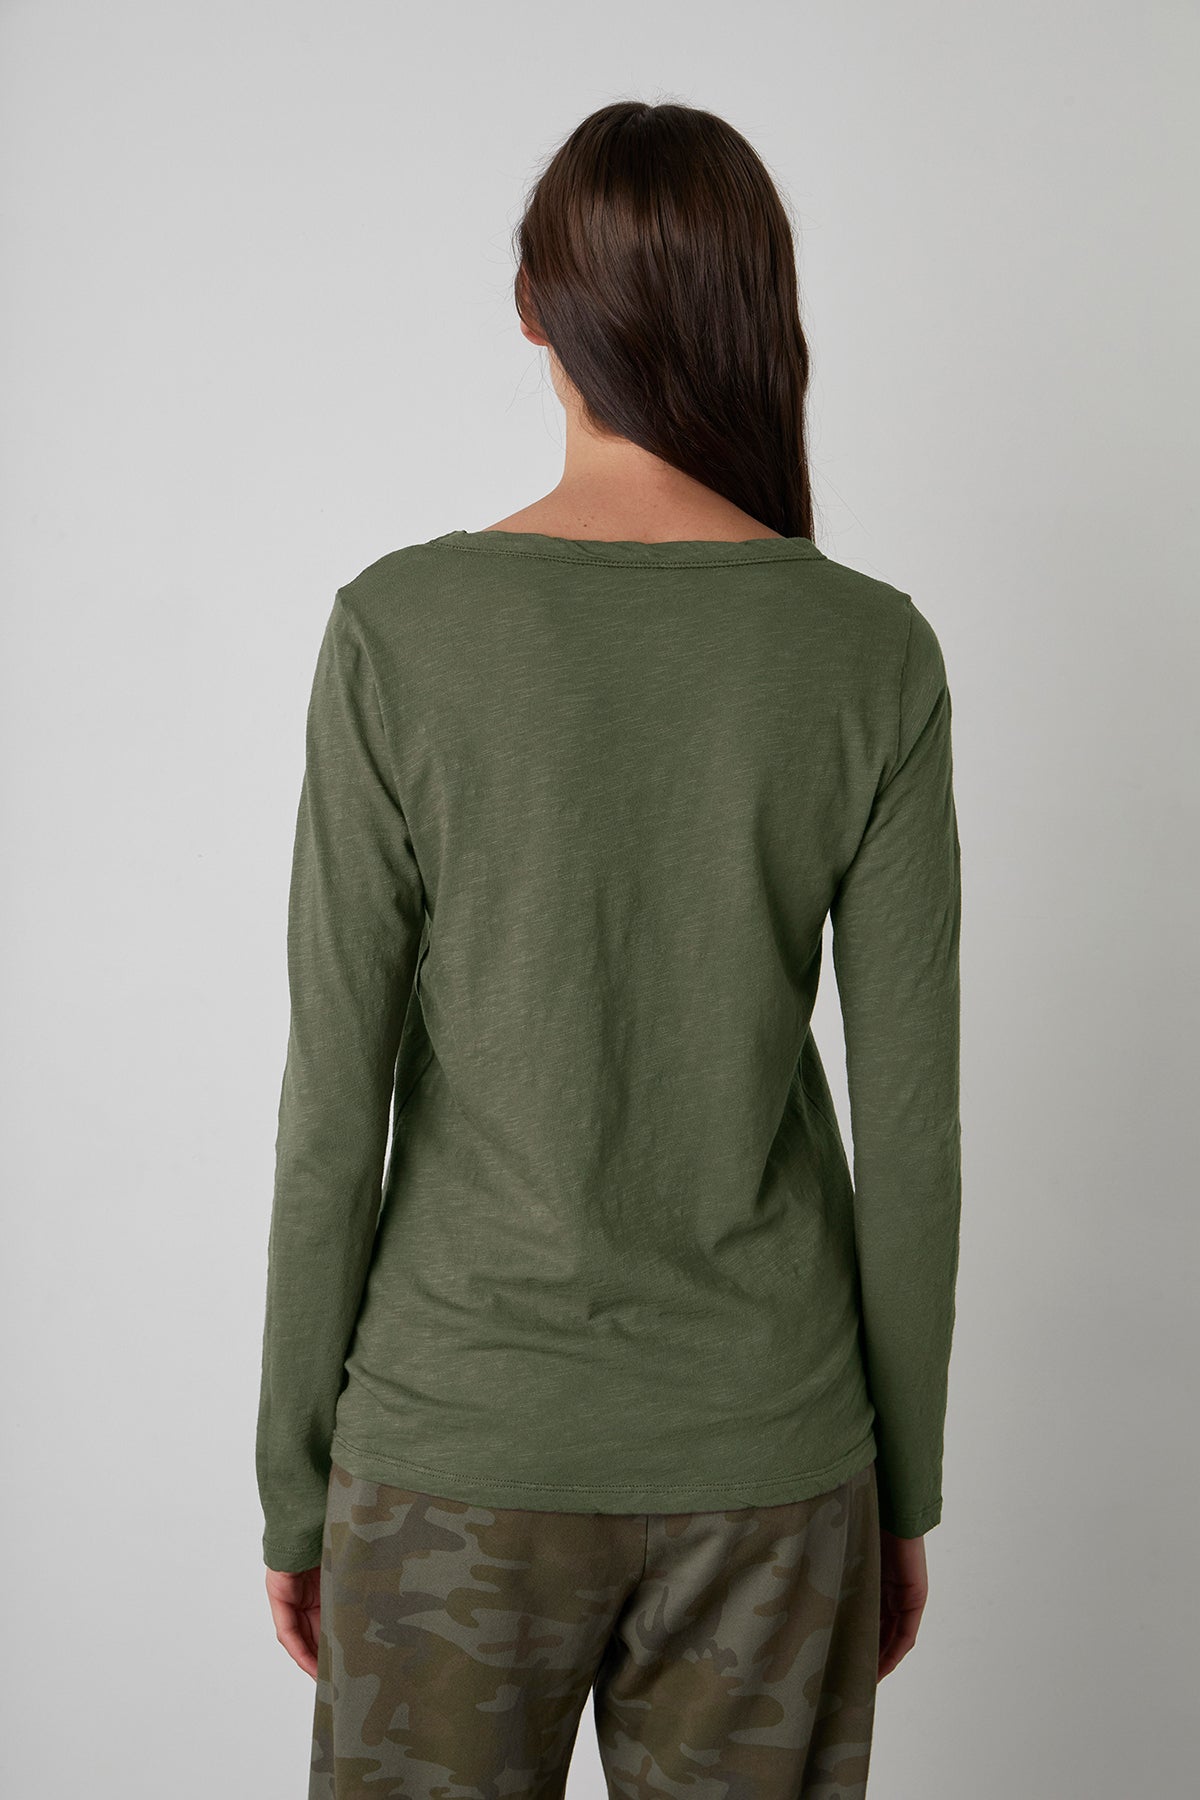   Lizzie Tee Olive with Skye Sweatpant Nettle Back 